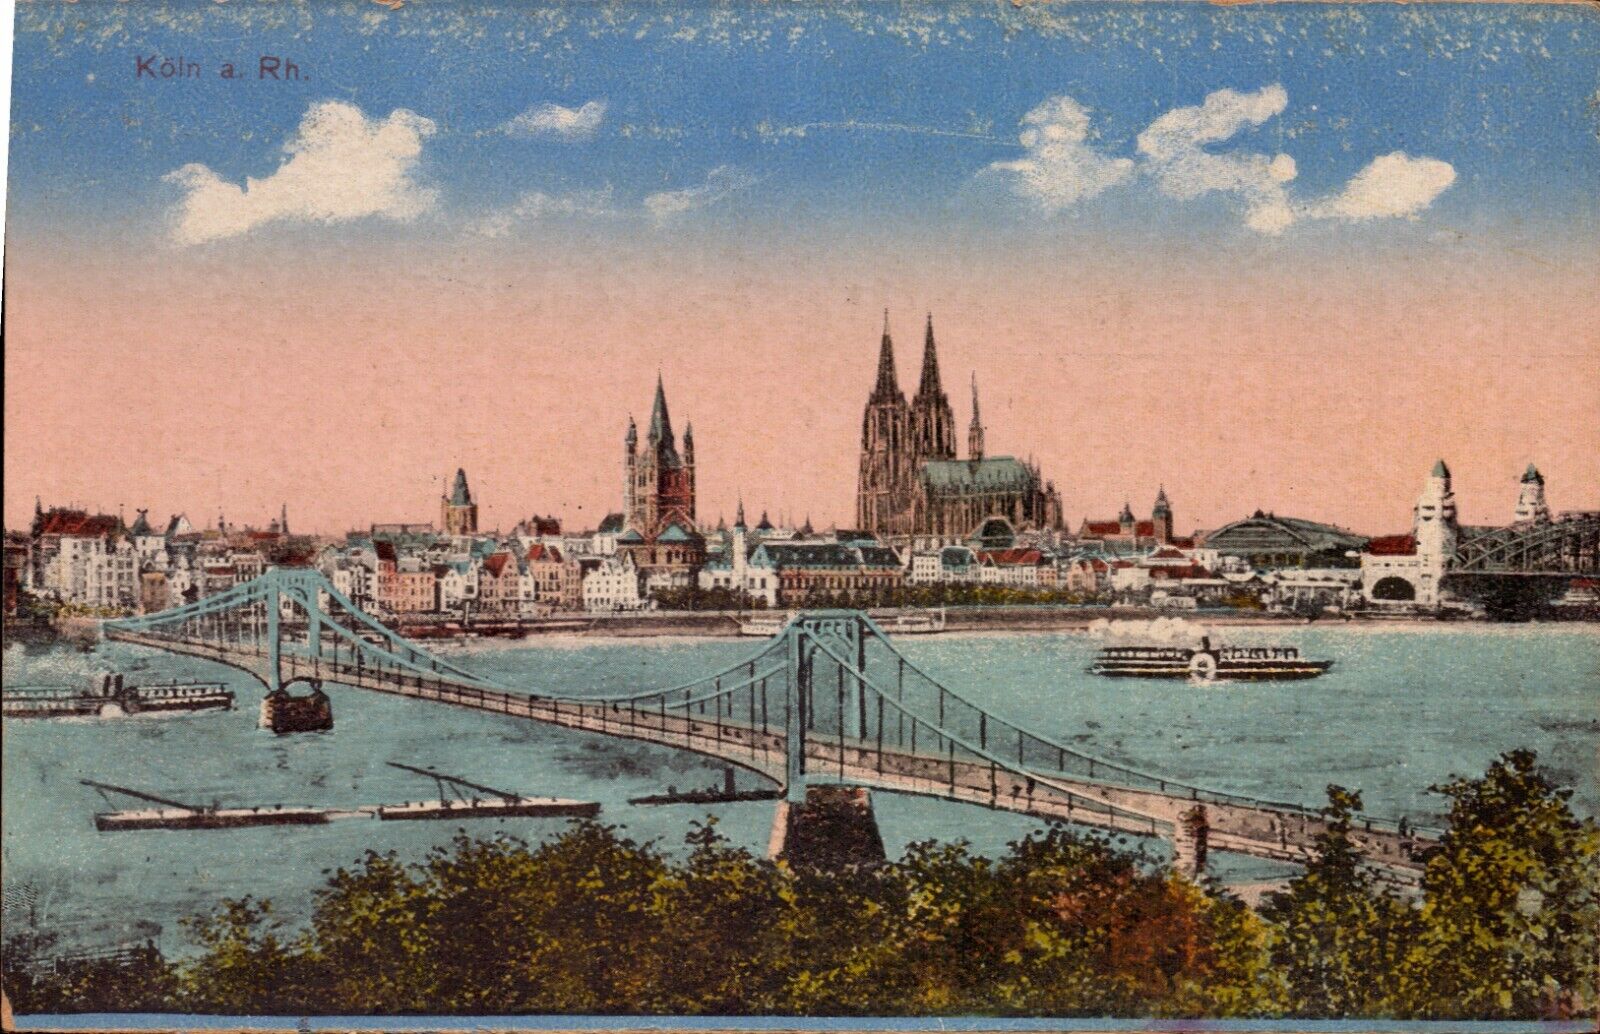 Postcard Germany bridge over water aerial view Koln a Rh c1900s old ferry boats